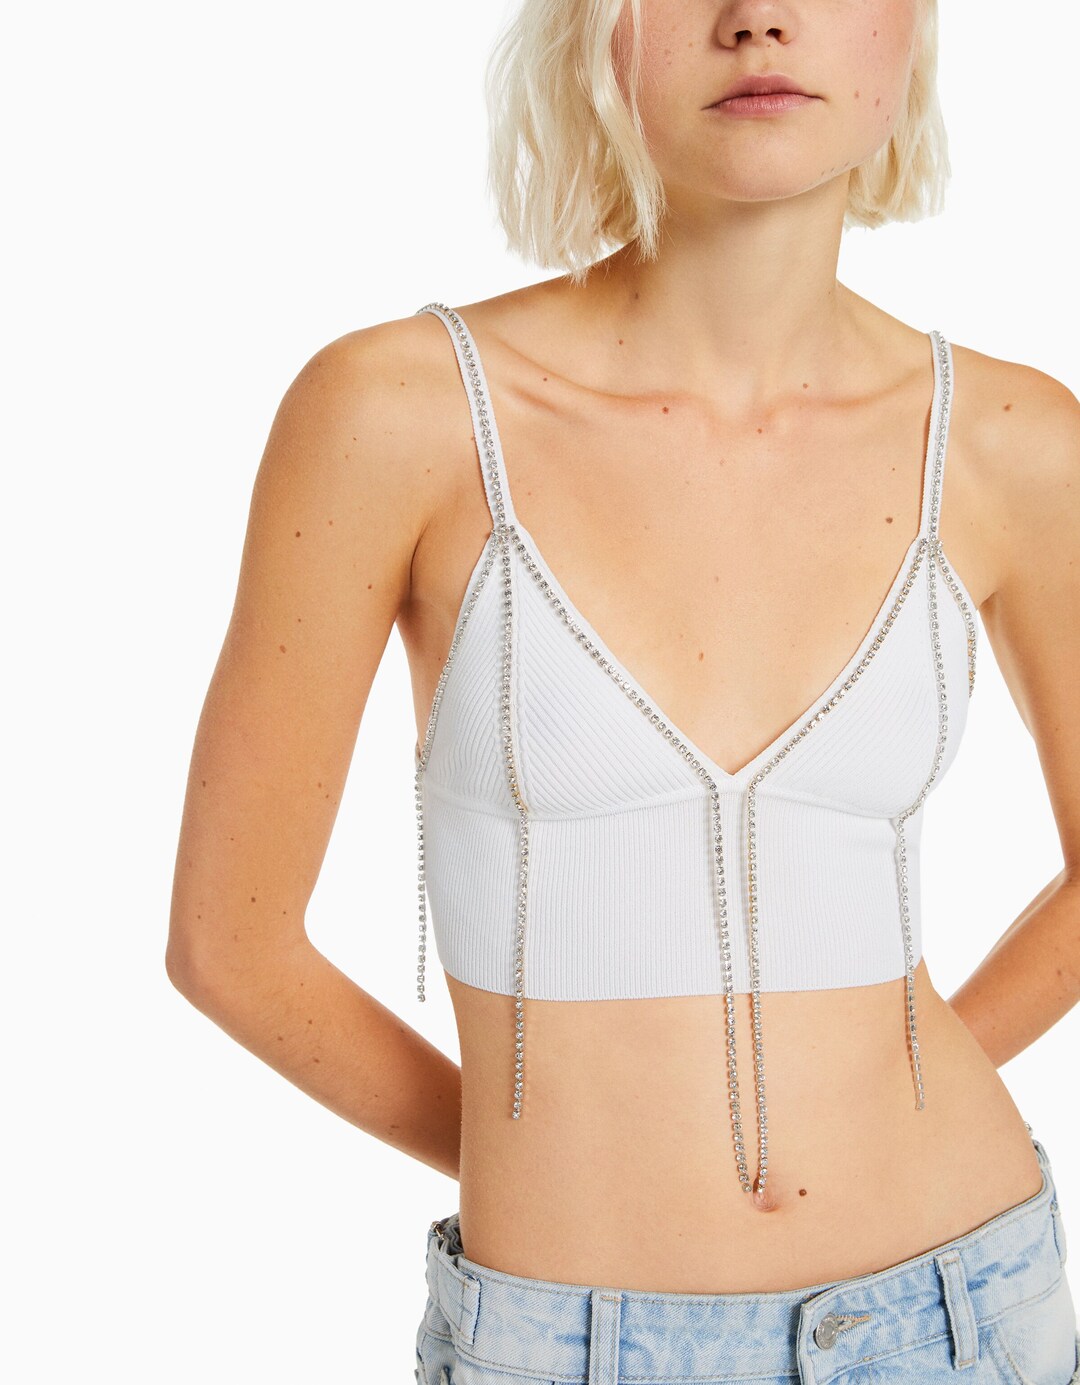 Strappy knit crop top with rhinestones